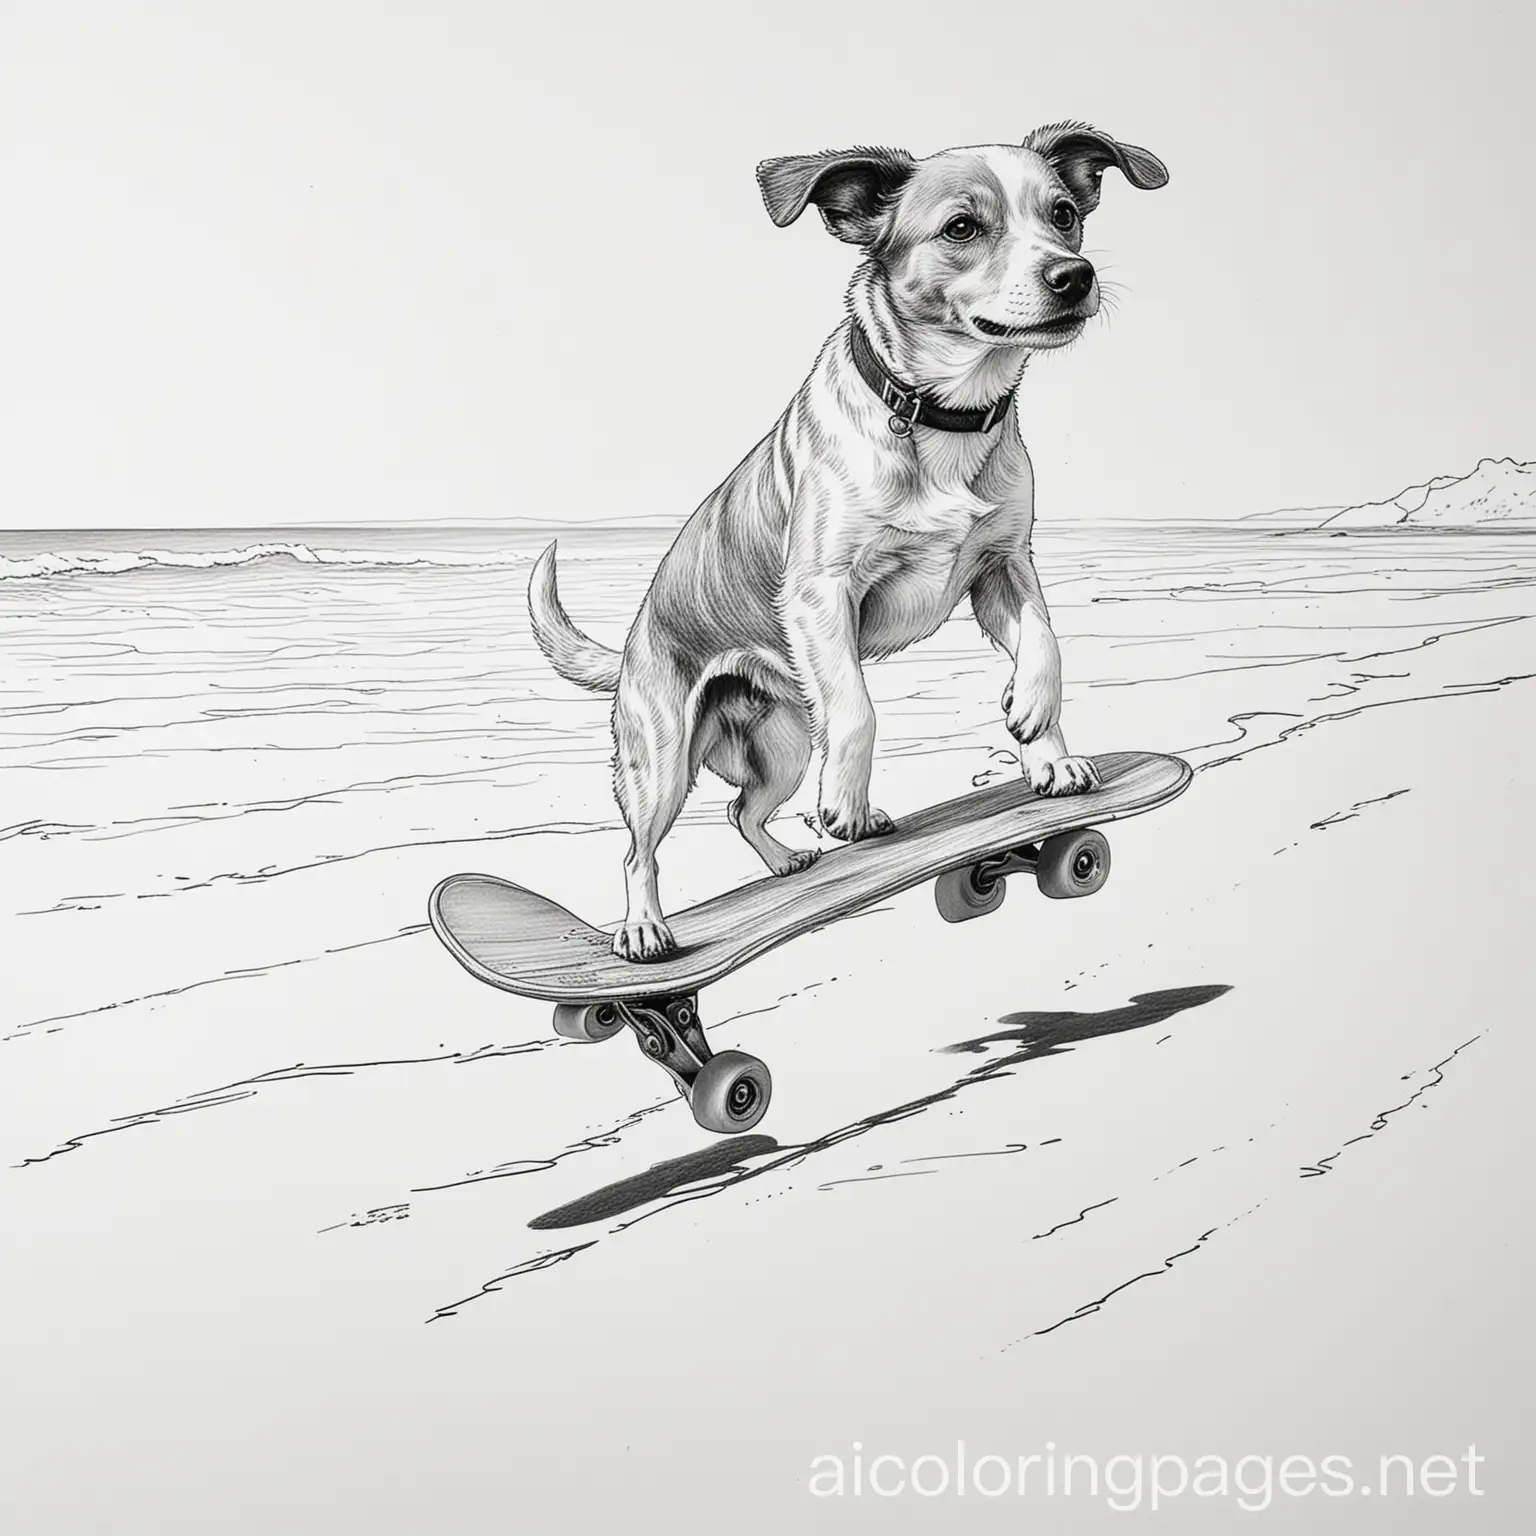 dog skateboarding at the beach, Coloring Page, black and white, line art, white background, Simplicity, Ample White Space. The background of the coloring page is plain white to make it easy for young children to color within the lines. The outlines of all the subjects are easy to distinguish, making it simple for kids to color without too much difficulty